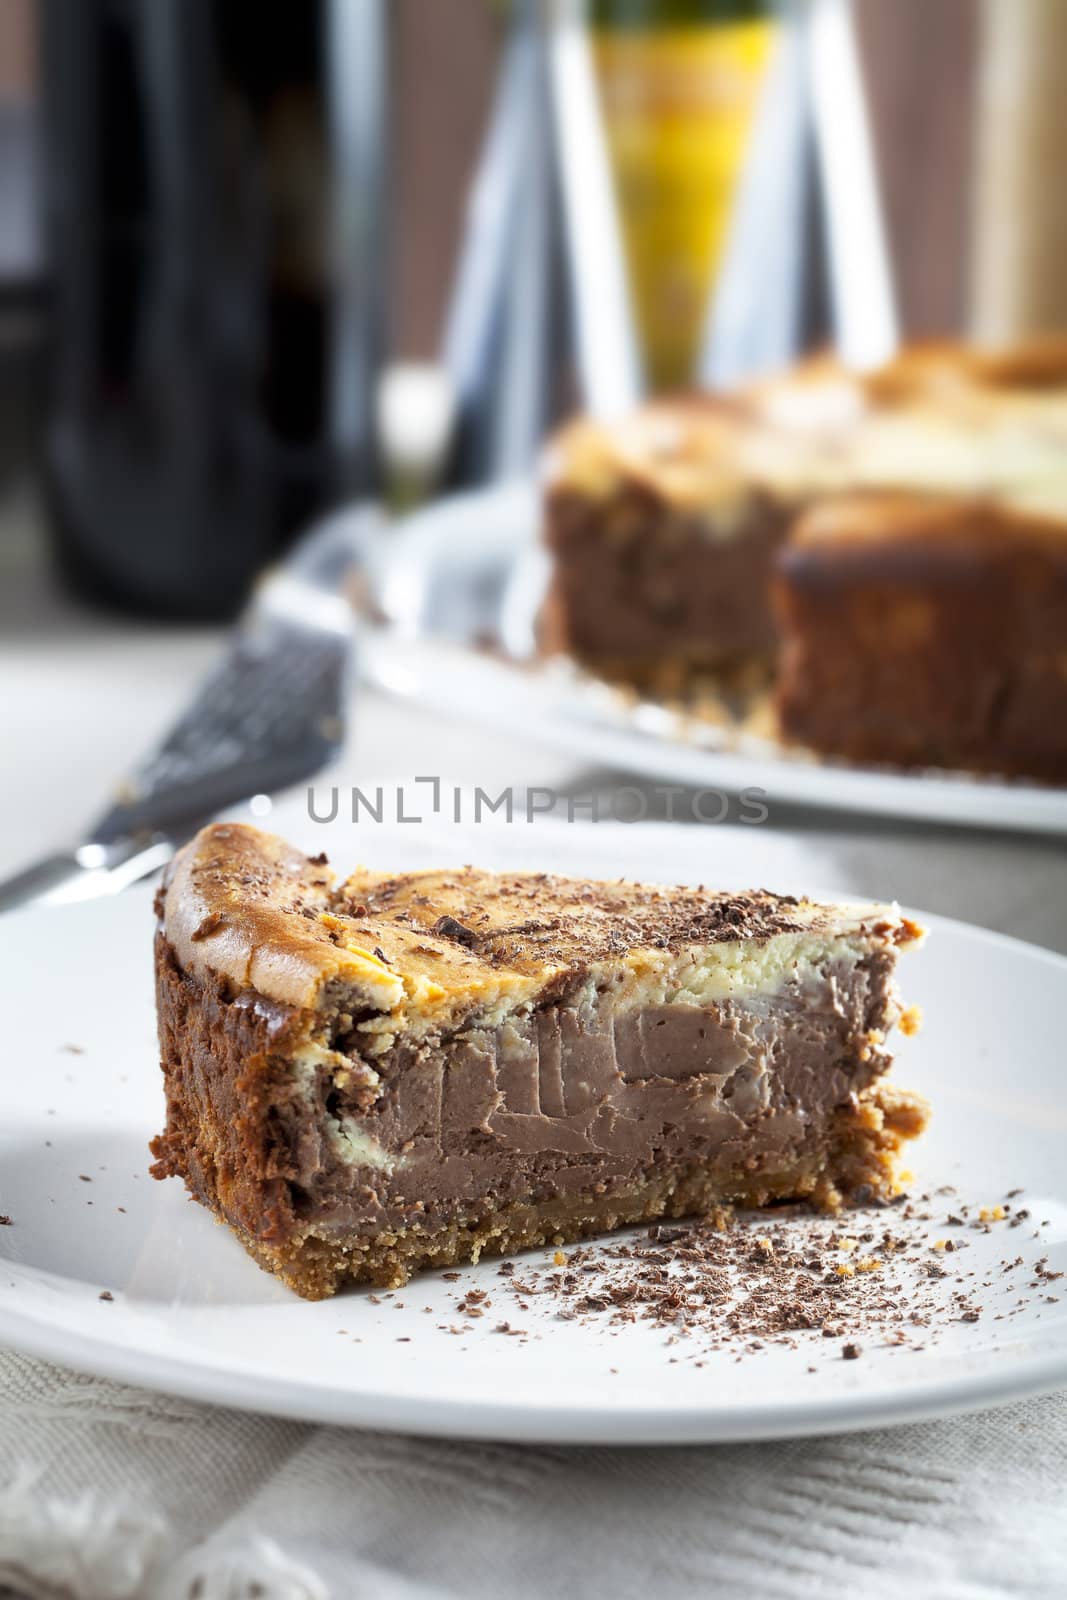 Slice of chocolate cheesecake with out of focus background.